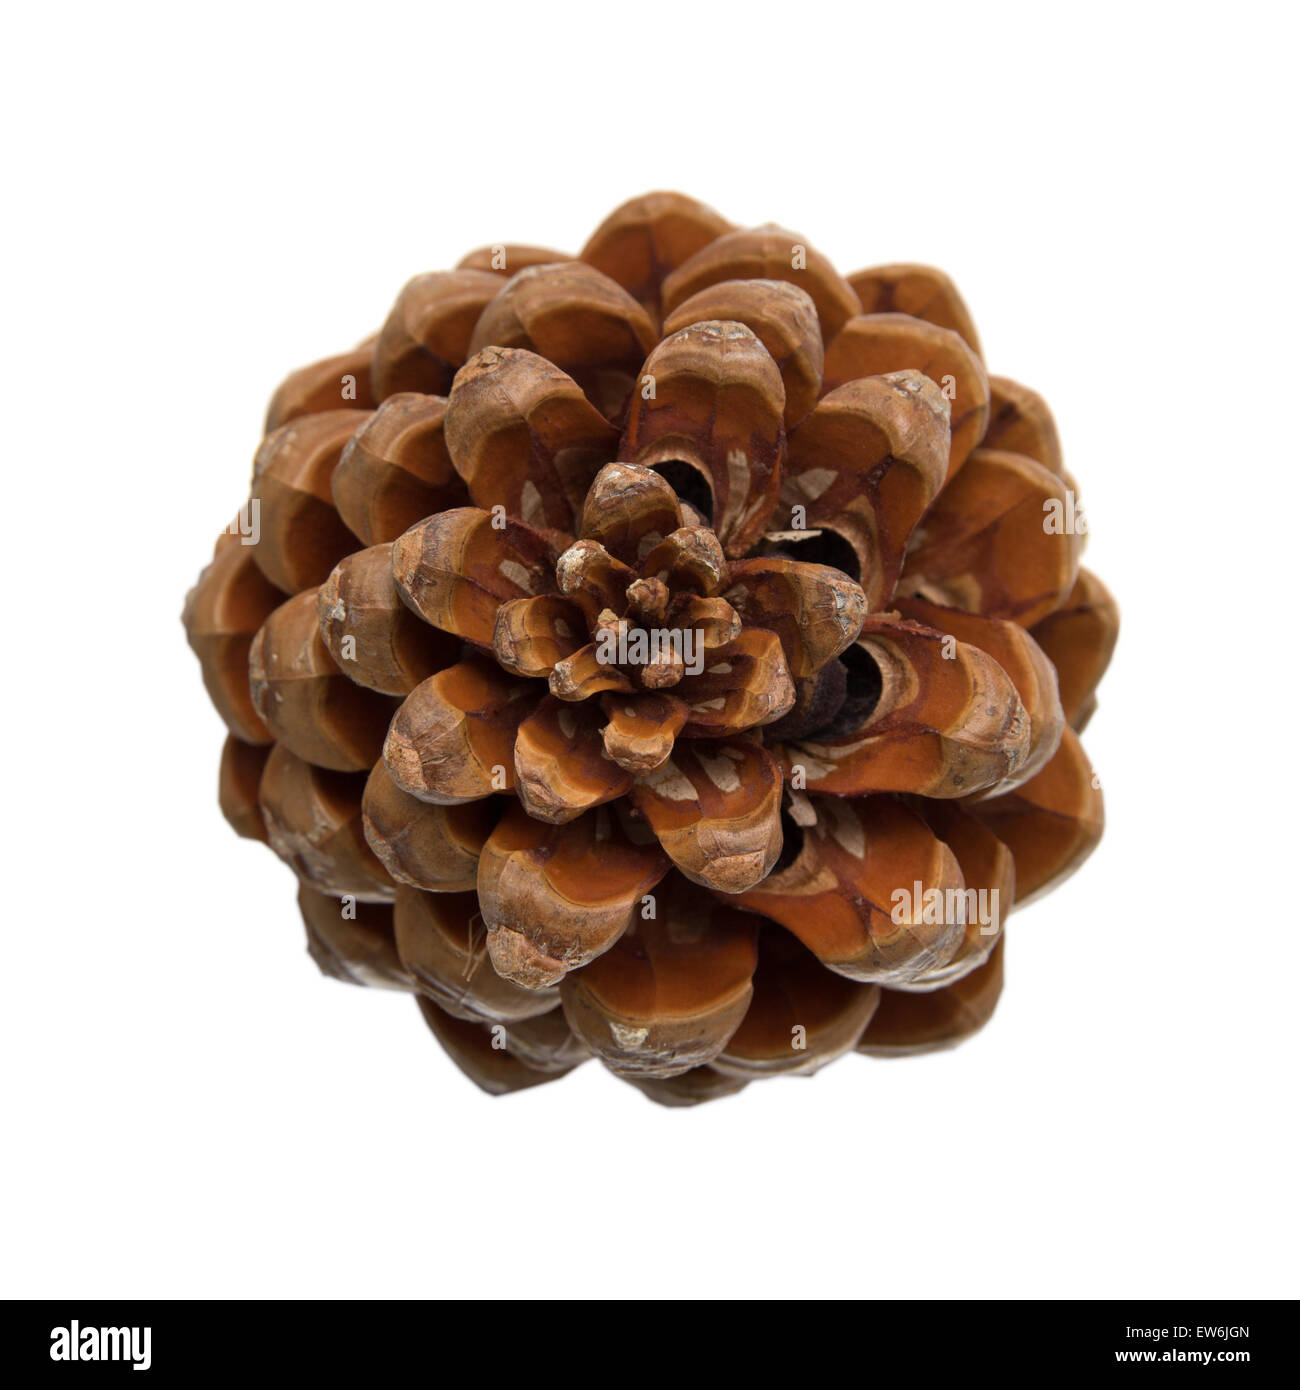 cone of stone pine, Pinus pinea, with some of the nuts still in, isolated on white background Stock Photo